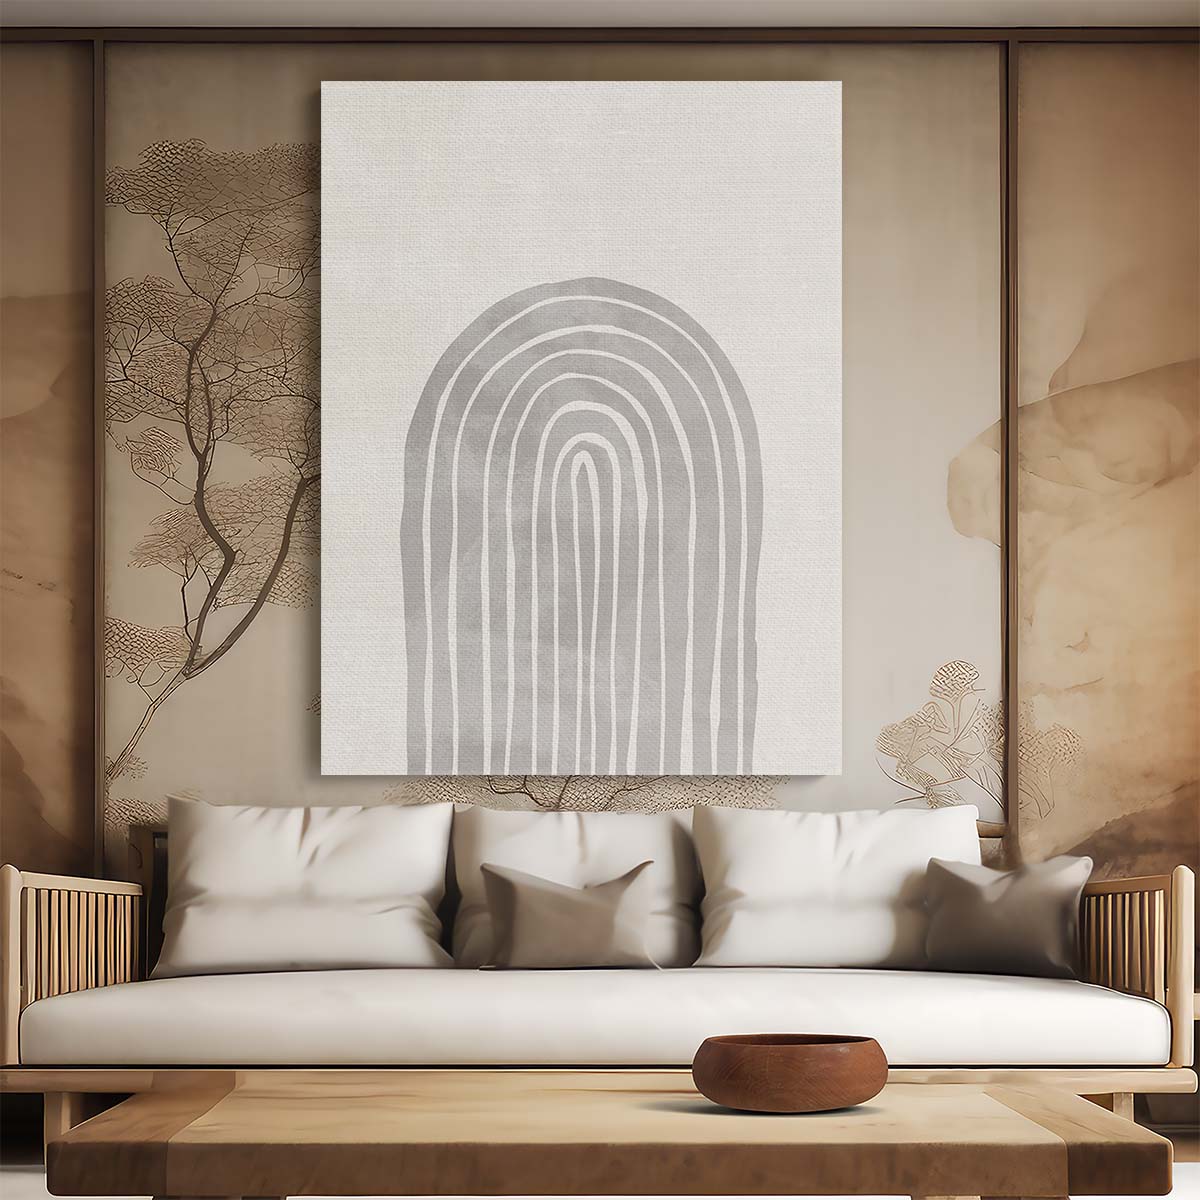 Abstract Geometric Illustration Symmetric Arch Shapes in Beige & Gray by Luxuriance Designs, made in USA